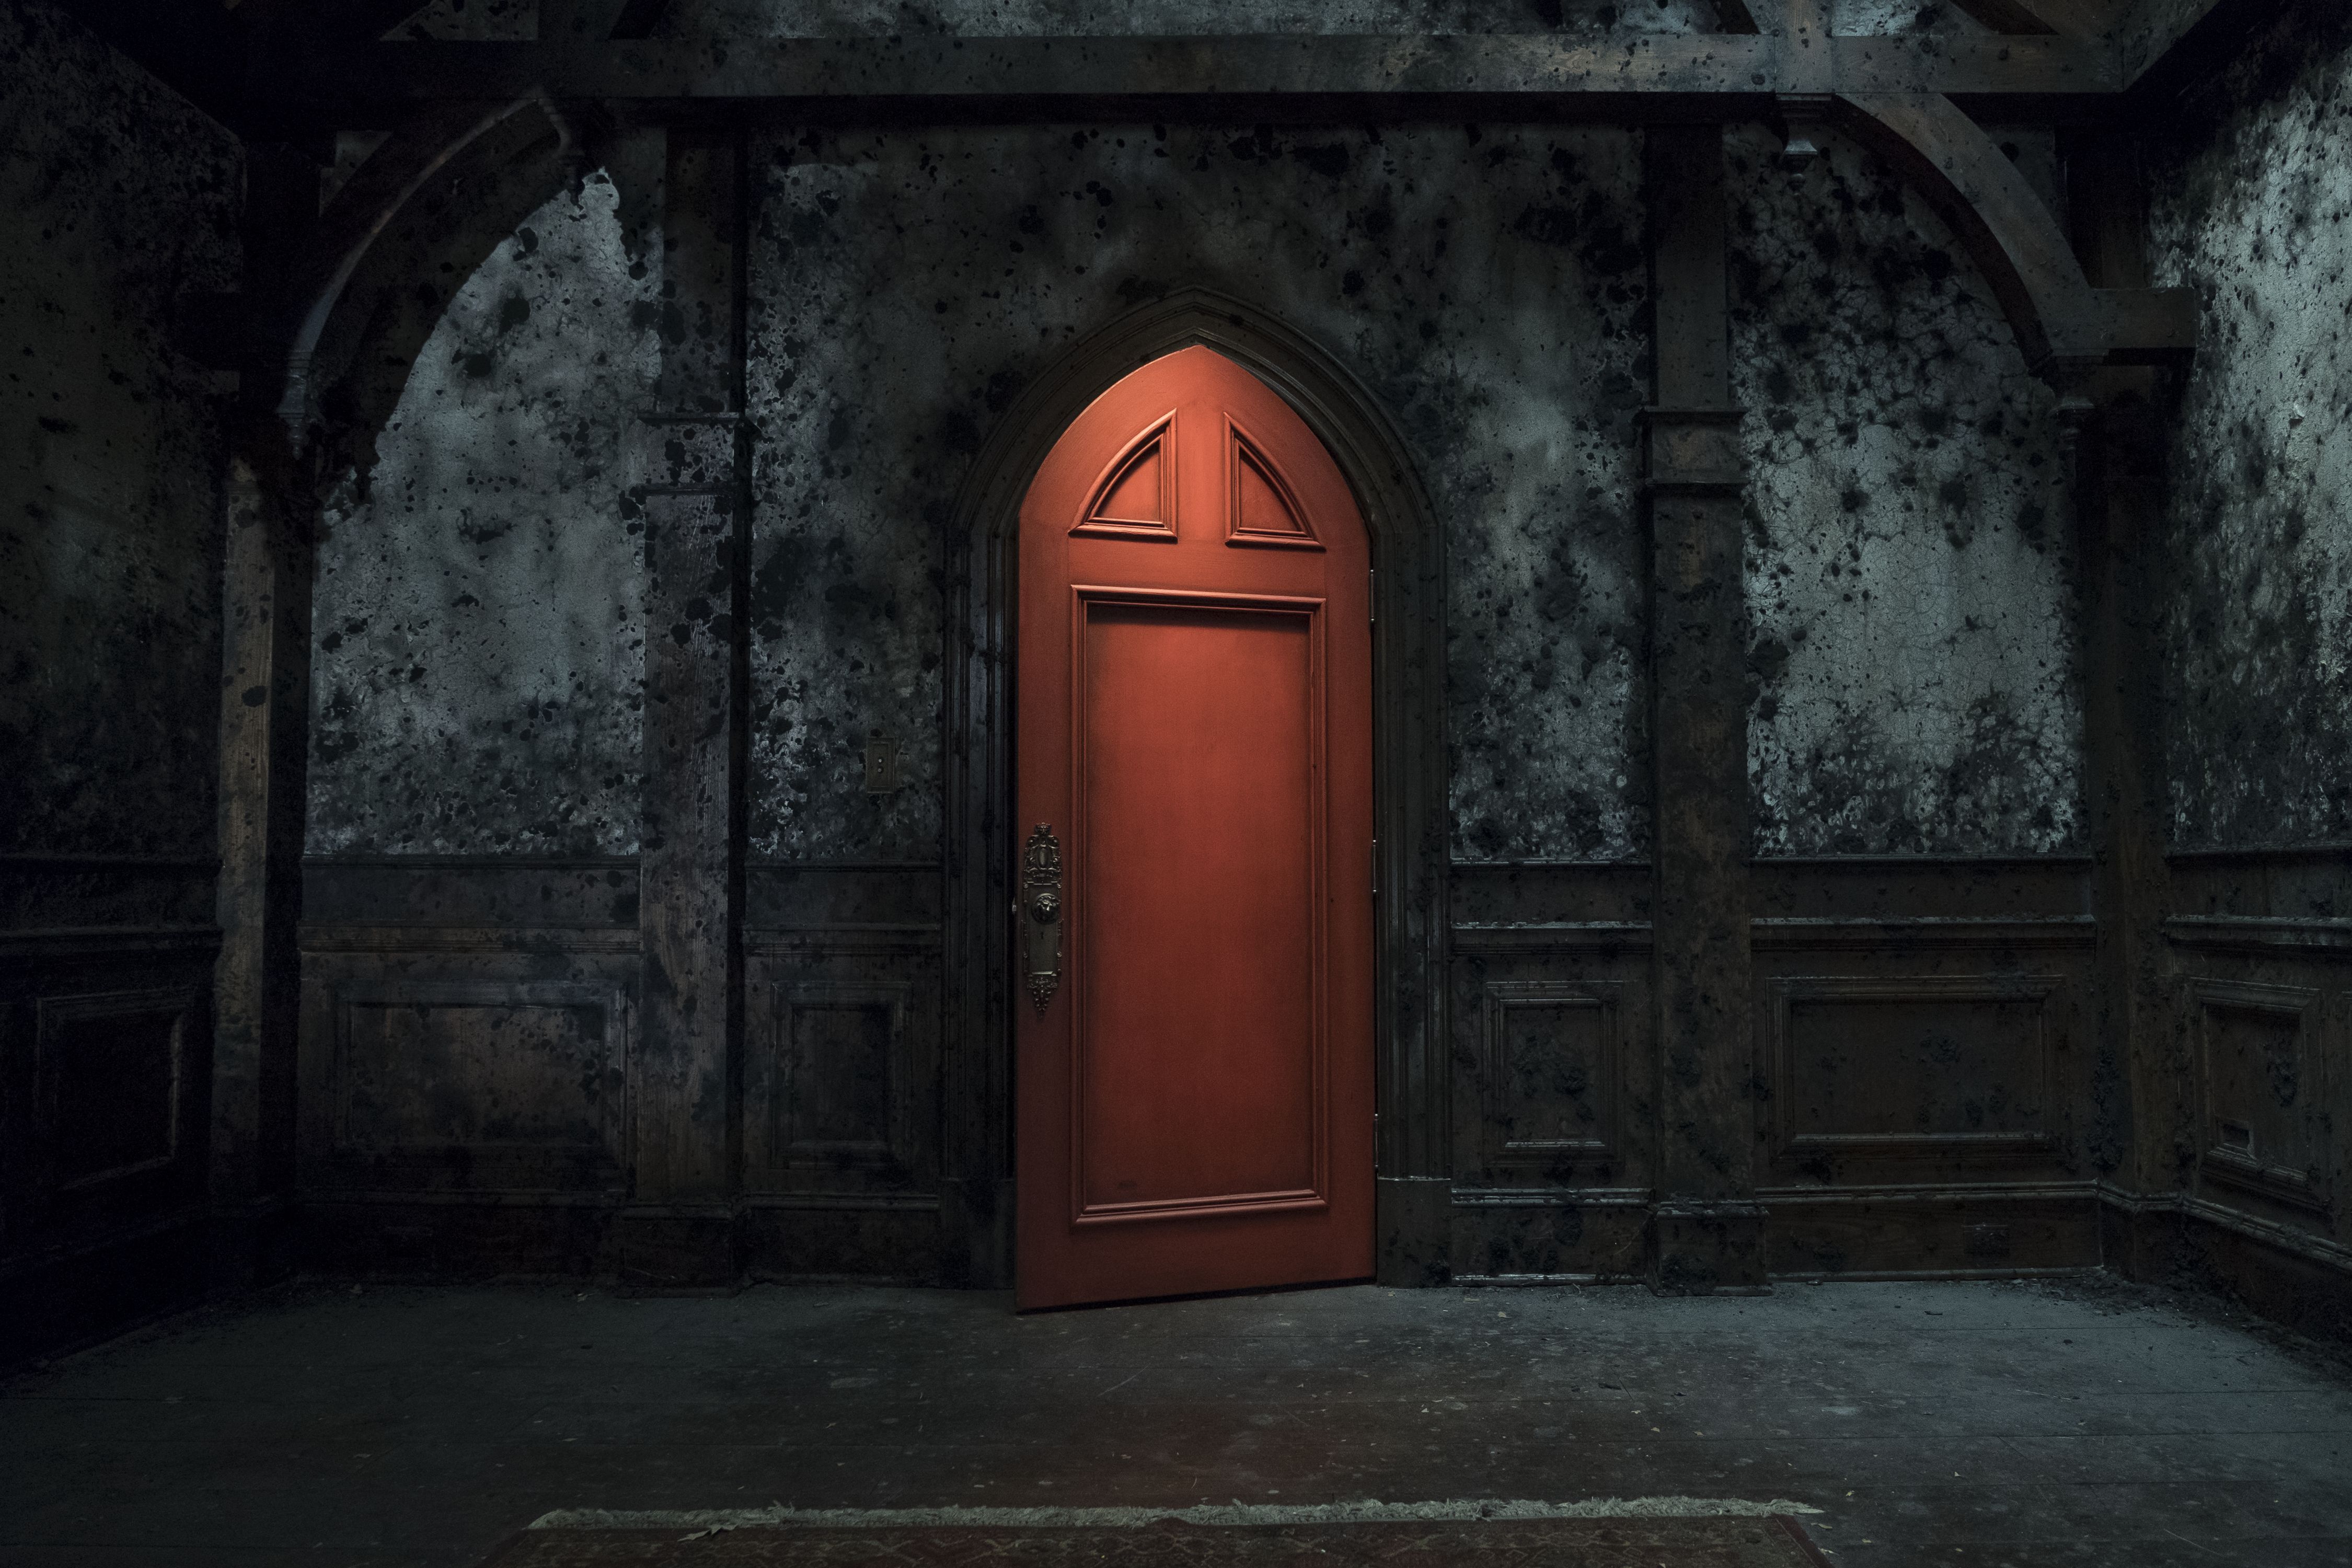 The Haunting of Hill House: The Red Room Explained